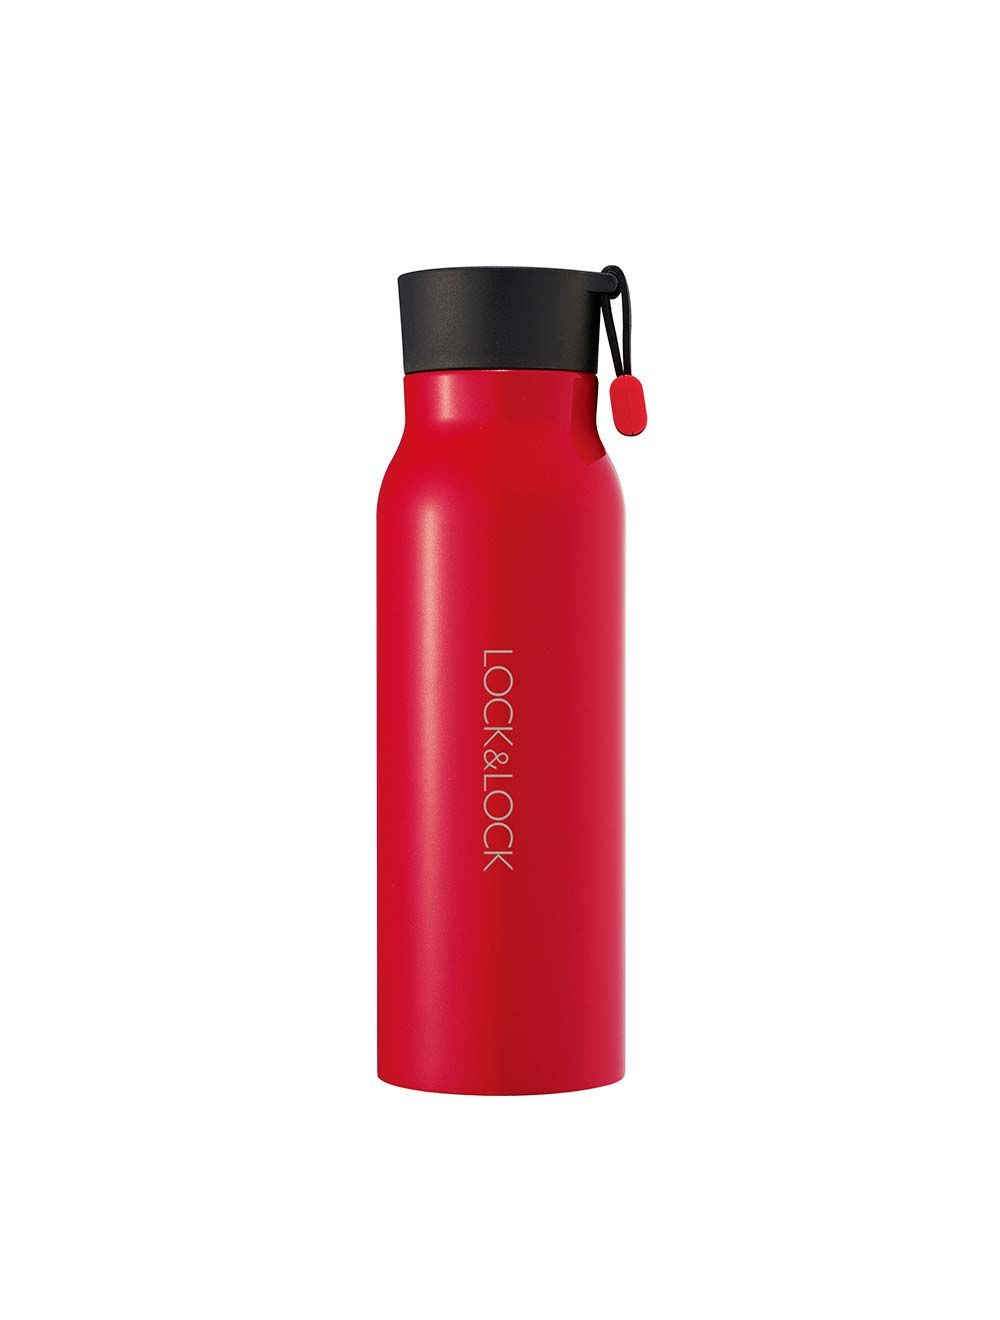 Lock & Lock Hot and Cool Name Tumbler 350 ml Red-HLHC4118R